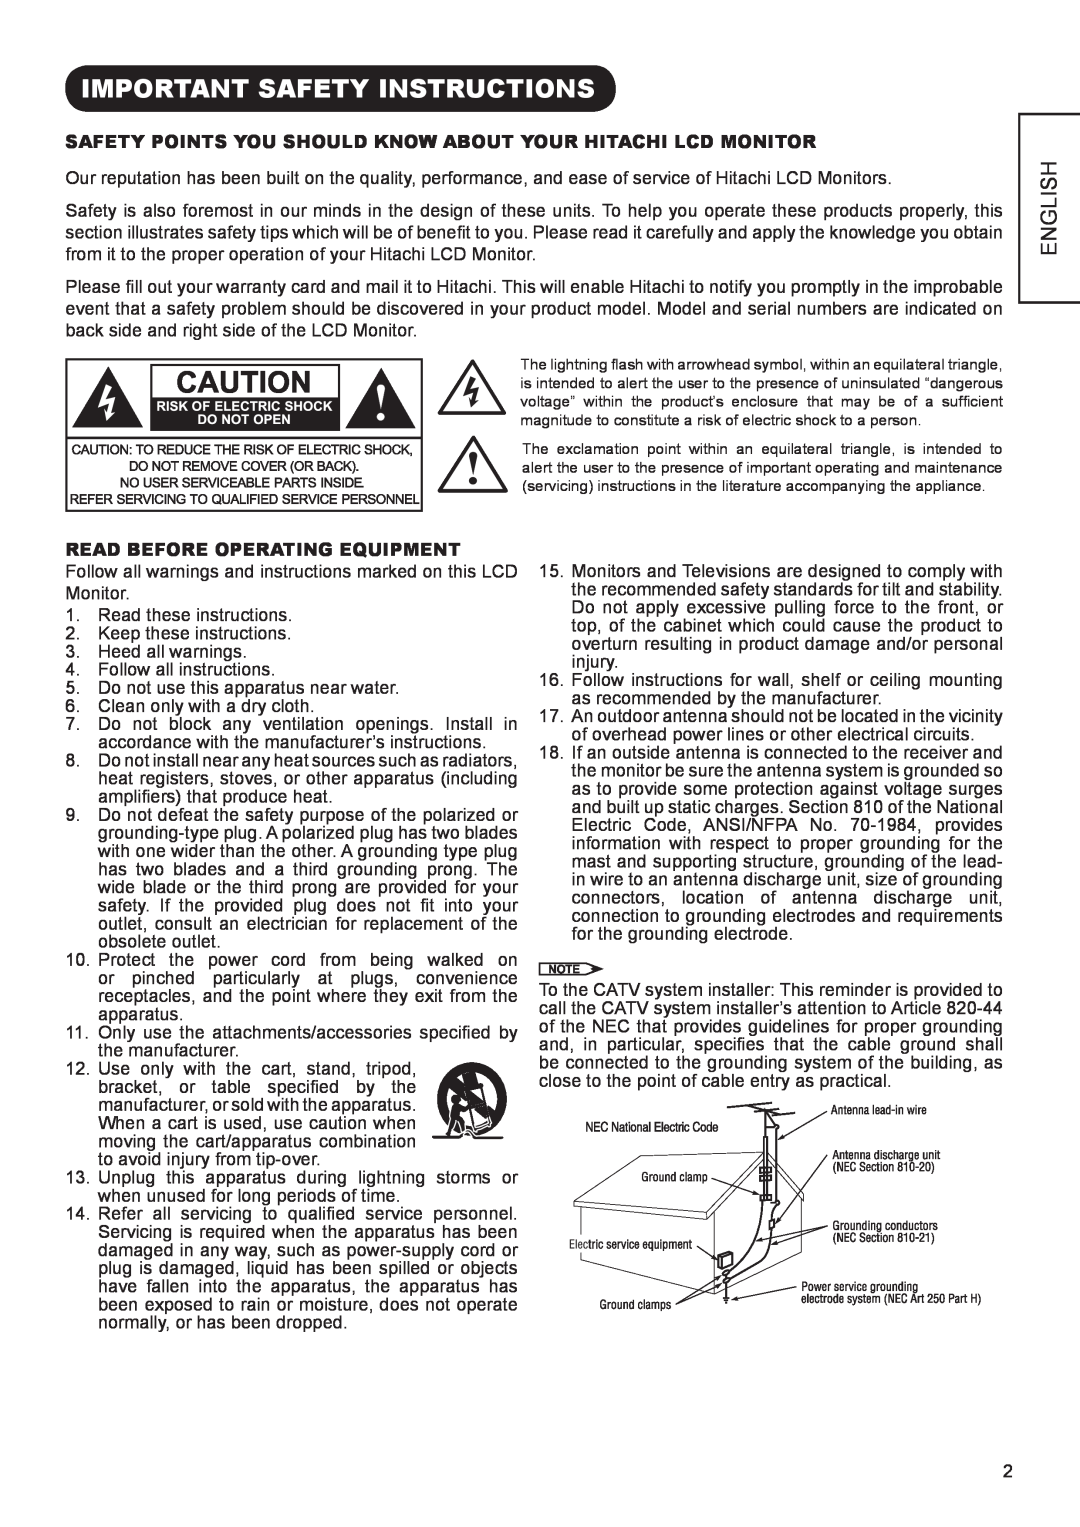 Hitachi UT47X902 Important Safety Instructions, English, Safety Points You Should Know About Your Hitachi Lcd Monitor 